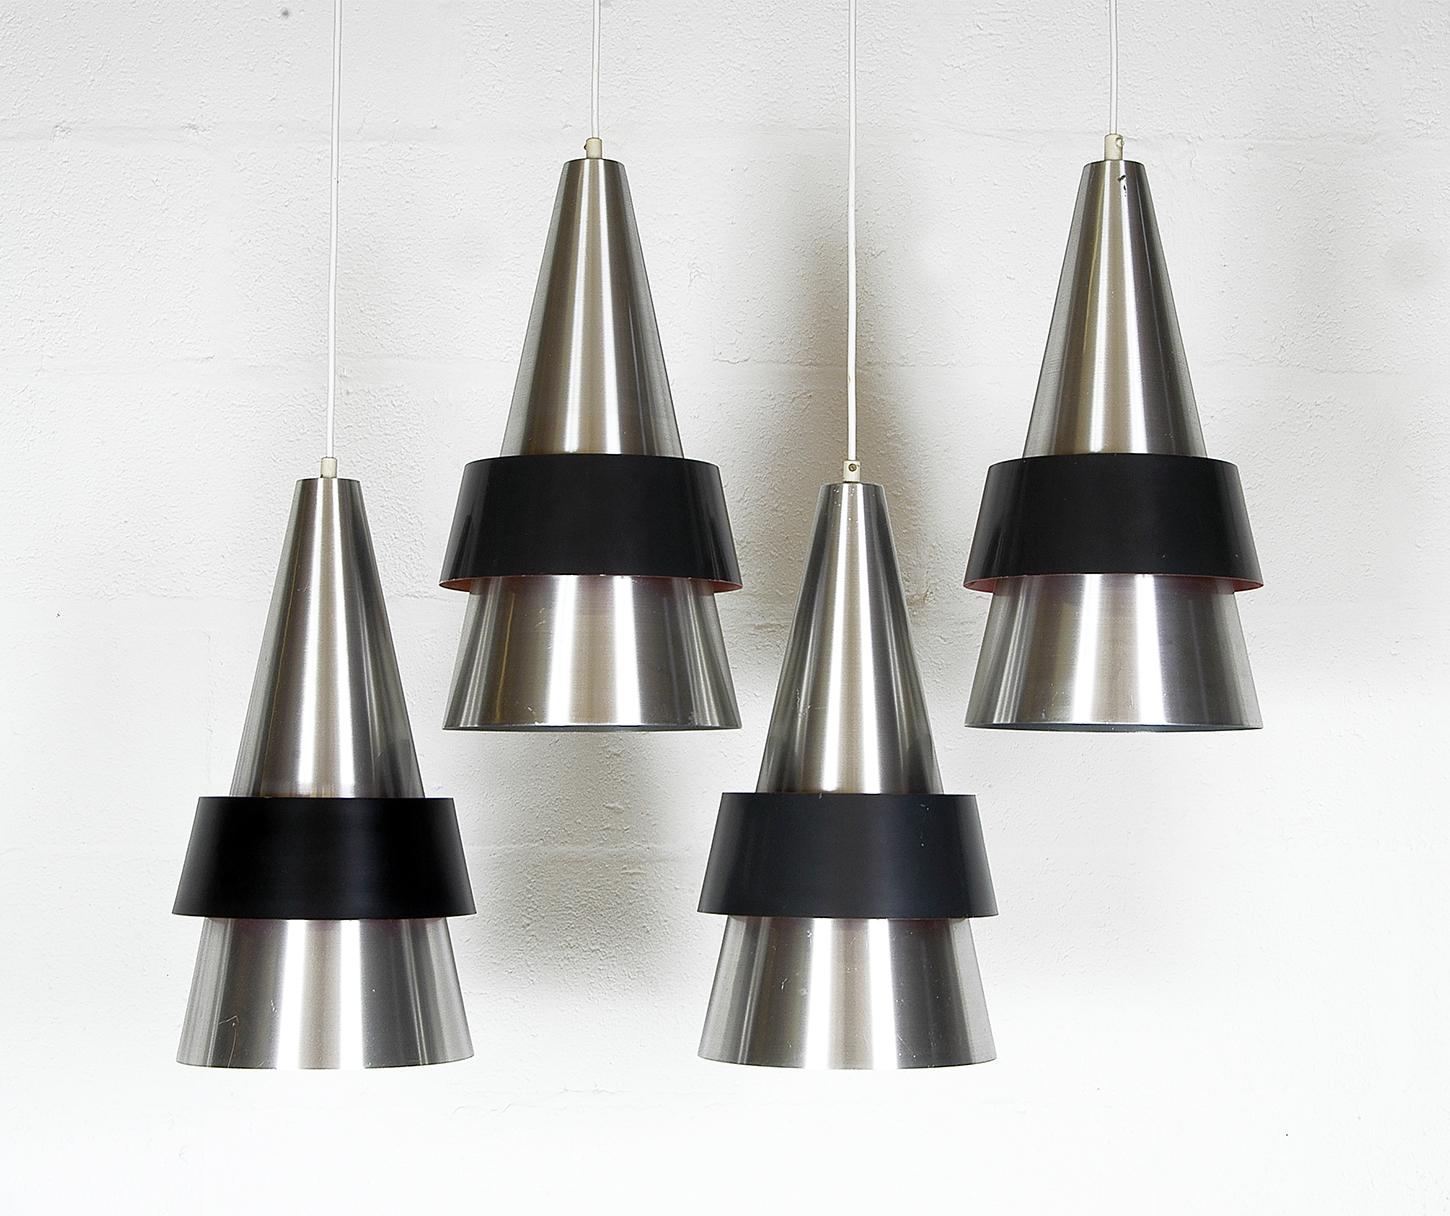 Four 1960s Danish Corona ceiling pendants by Jo Hammerborg for Fog & Morup. Launched by Fog & Morup in 1963 the conical ‘Corona’ pendant was another instant classic designed by Johannes Hammerborg, their head of design. 
Comprising a spun aluminium